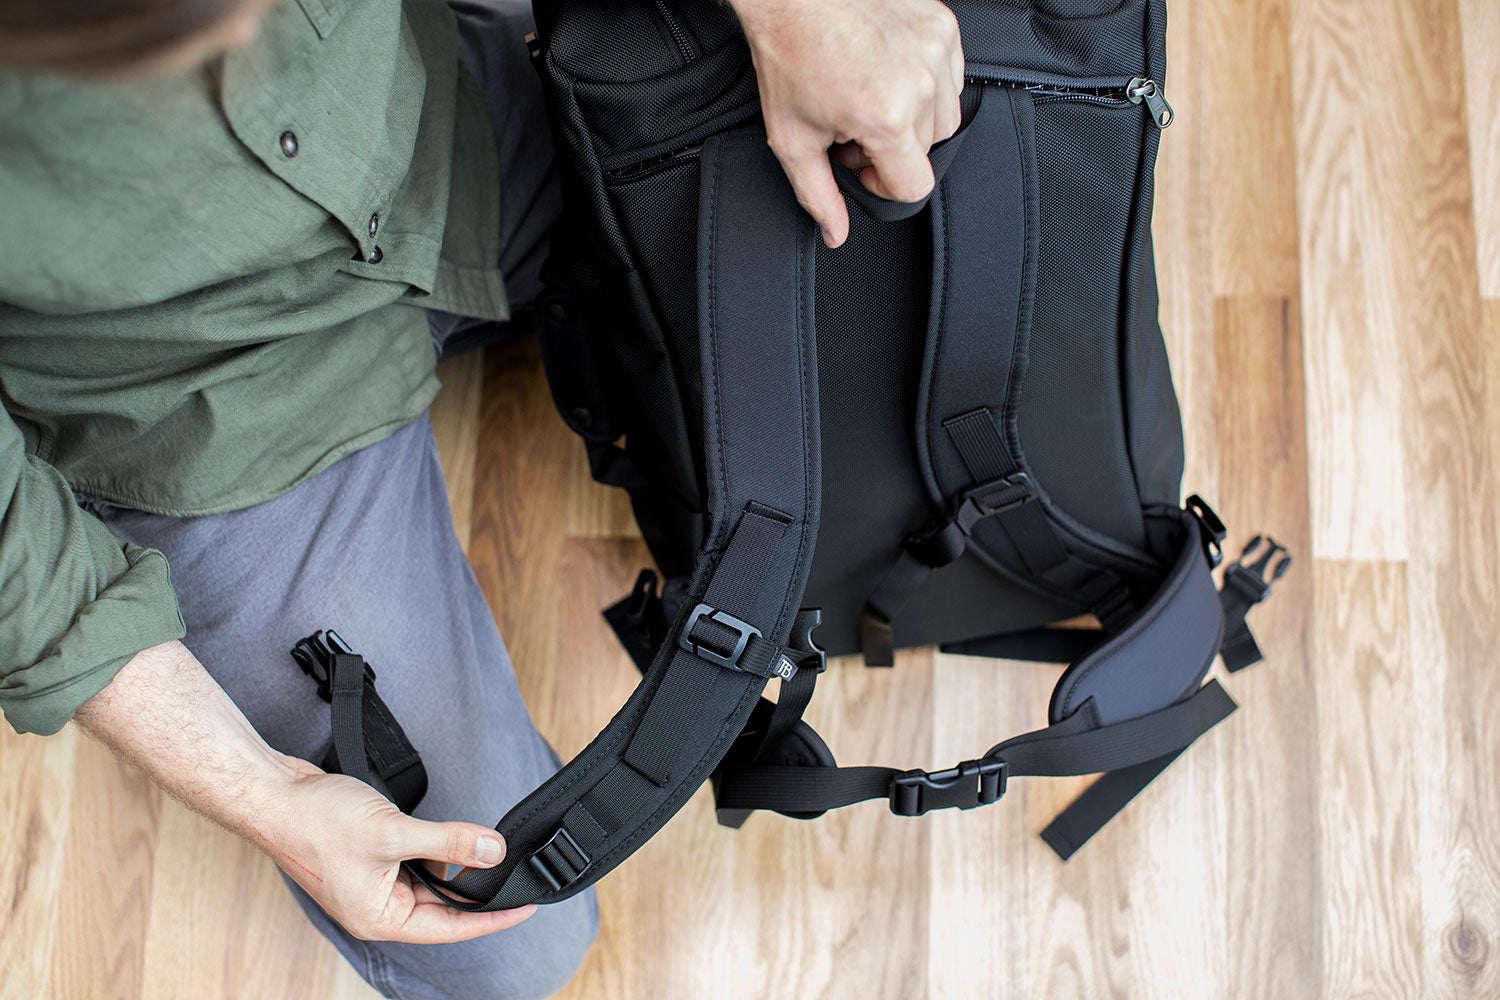 How To: Install the Aeronaut Internal Frame and/or Padded Hip Belt